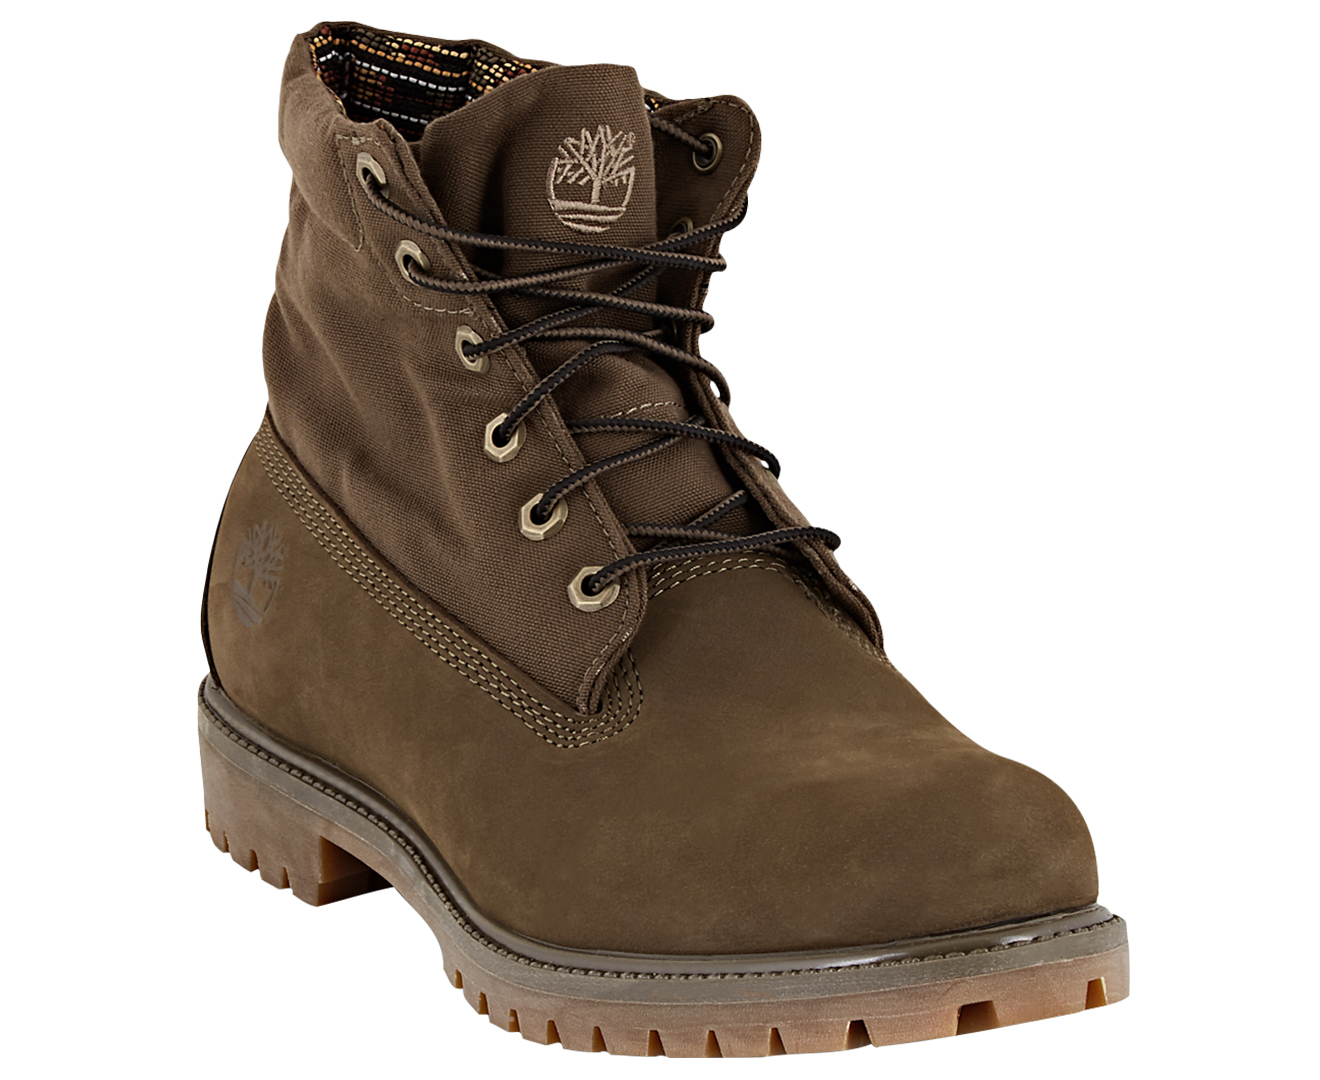 Timberland roll top boots